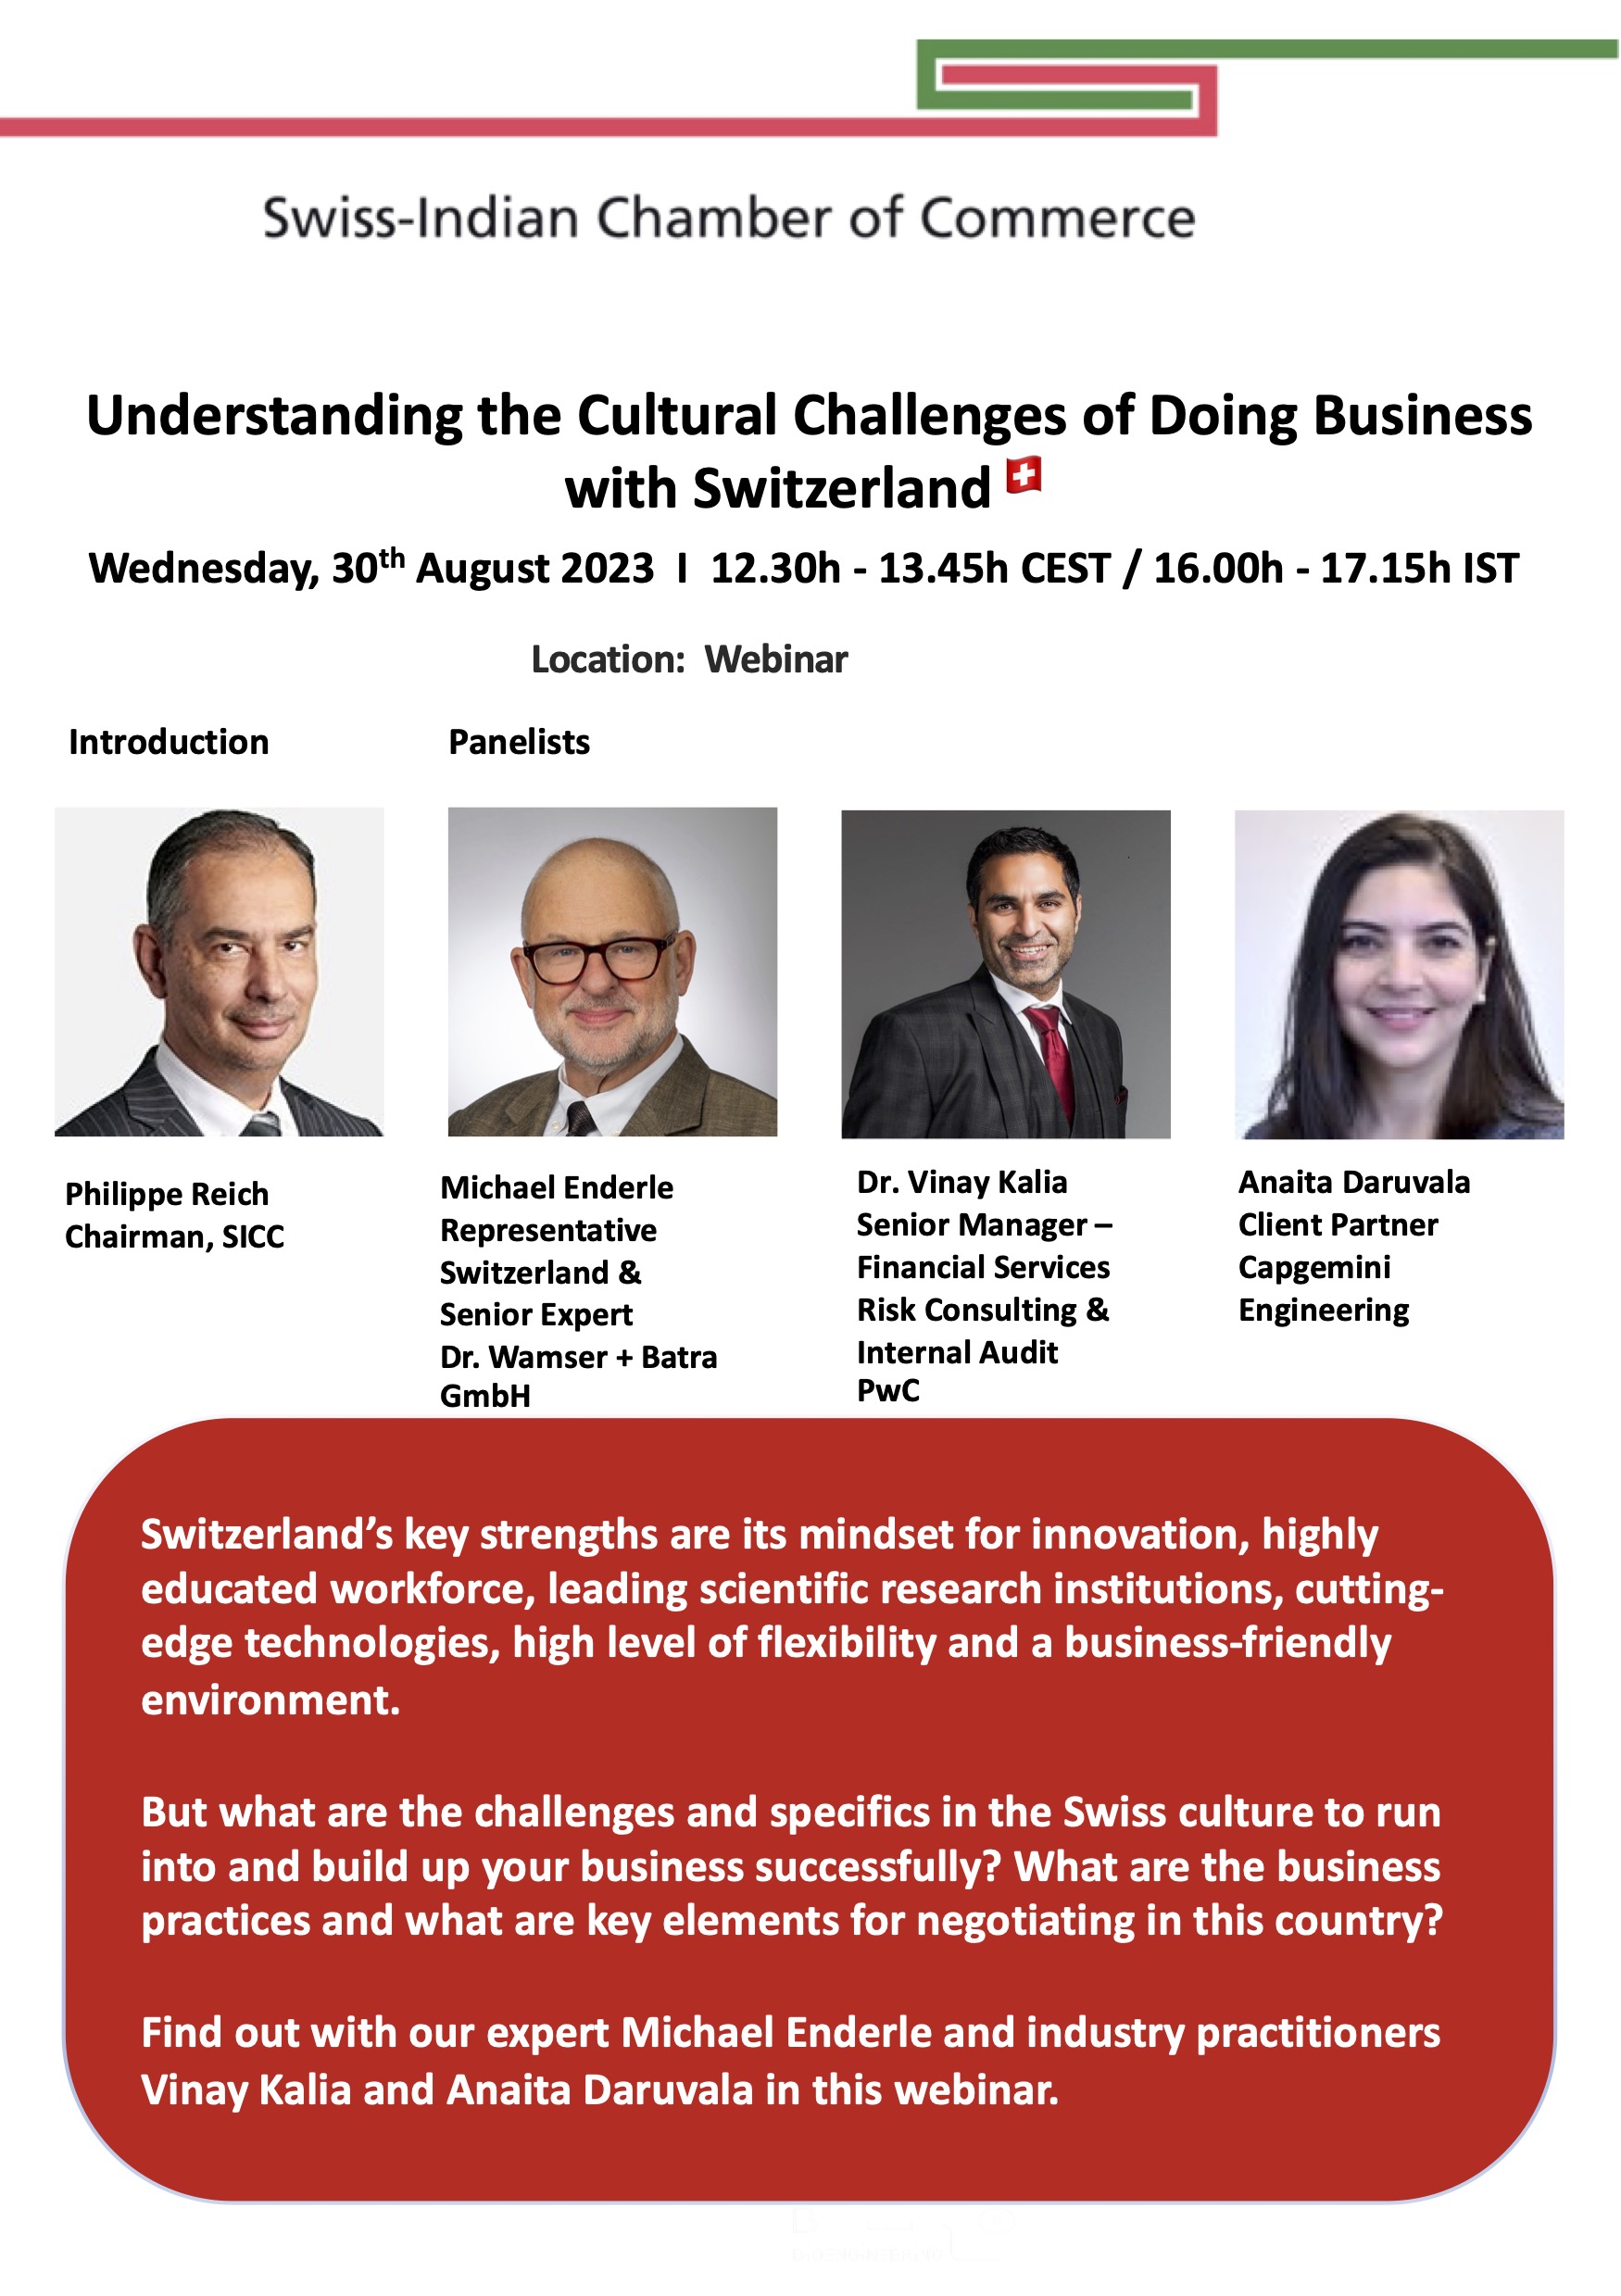 Understanding the cultural challenges of doing business with CH 30.08.23